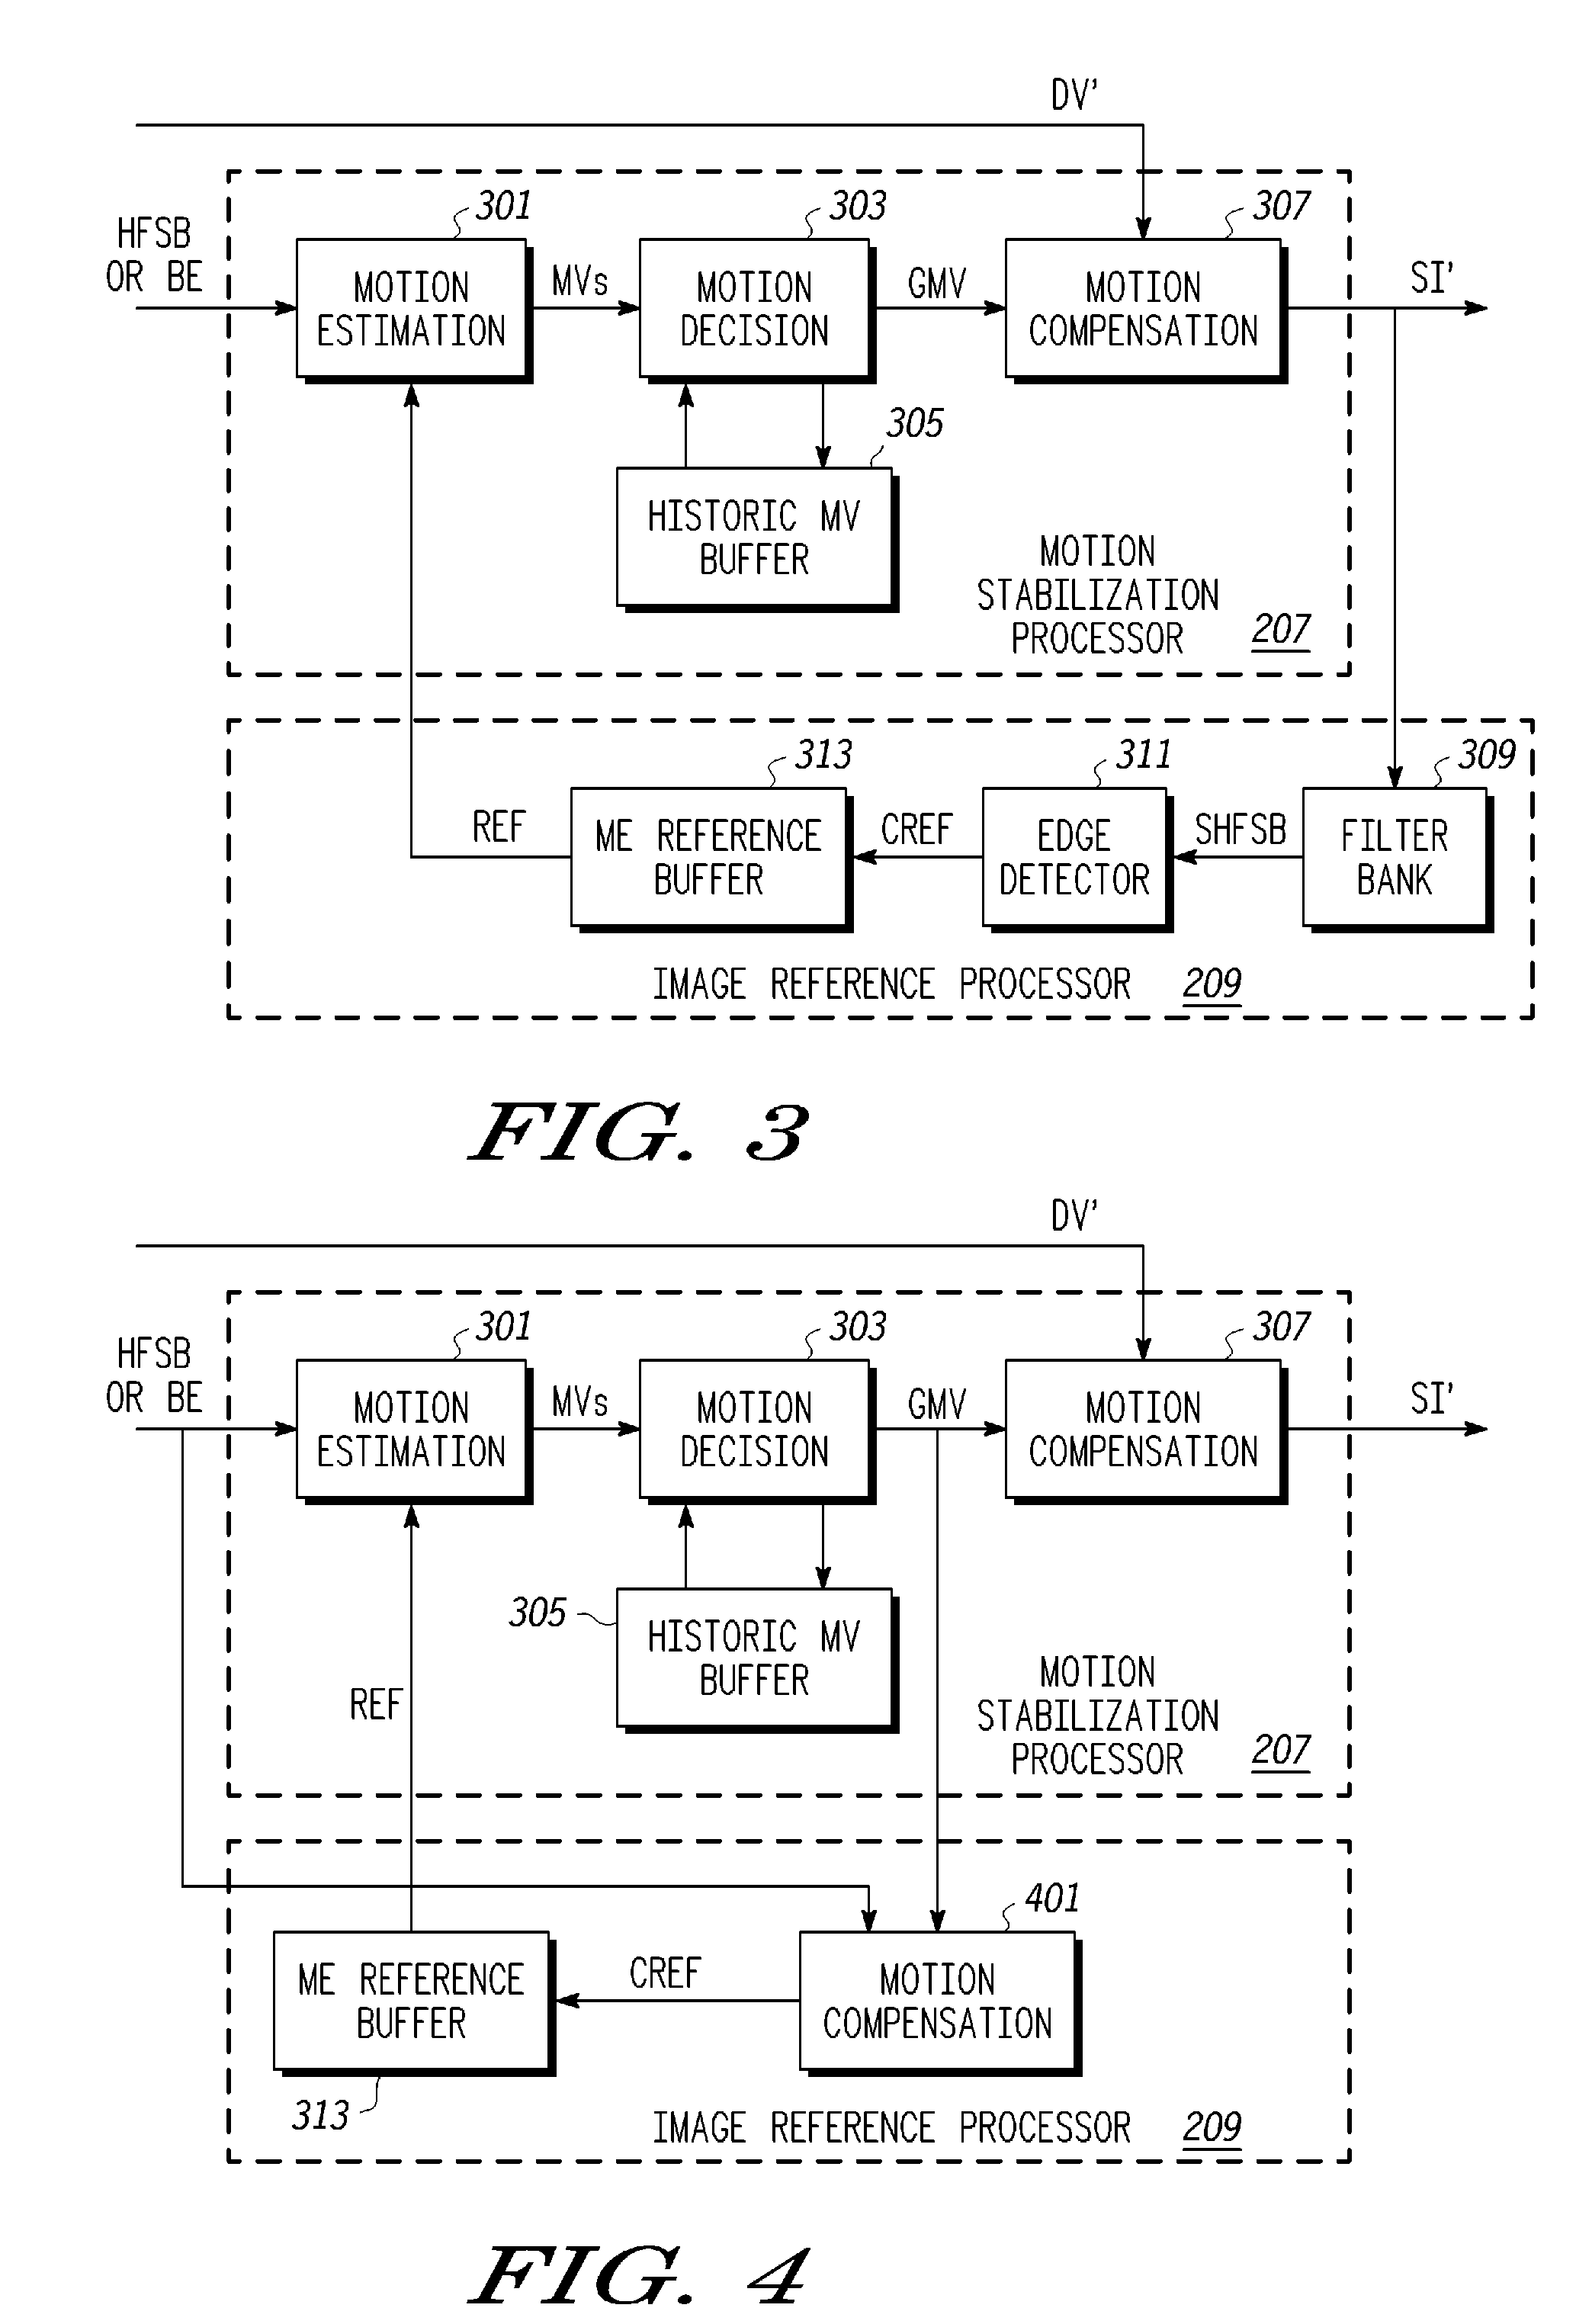 Image and video motion stabilization system